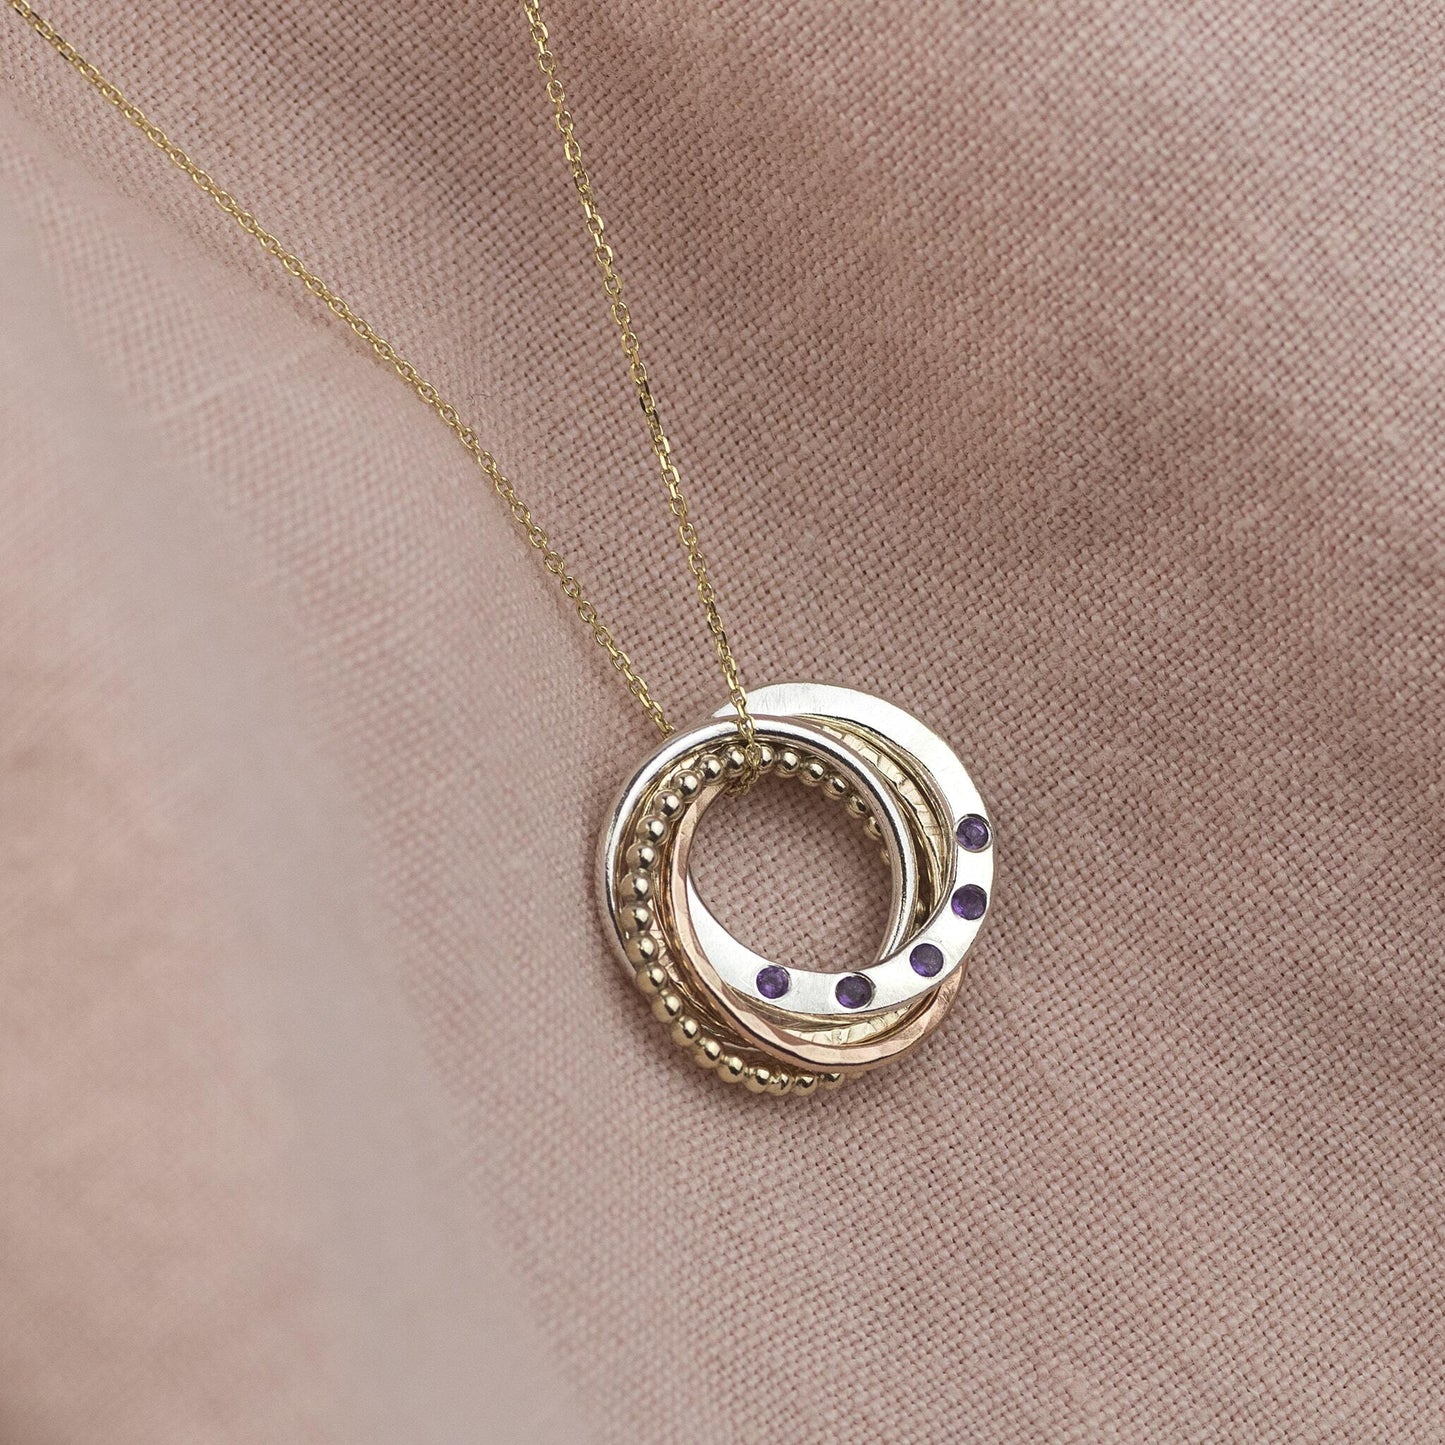 9kt Gold 50th Birthday Necklace - 5 Birthstones for 5 Decades - Recycled Gold, Rose Gold and Silver